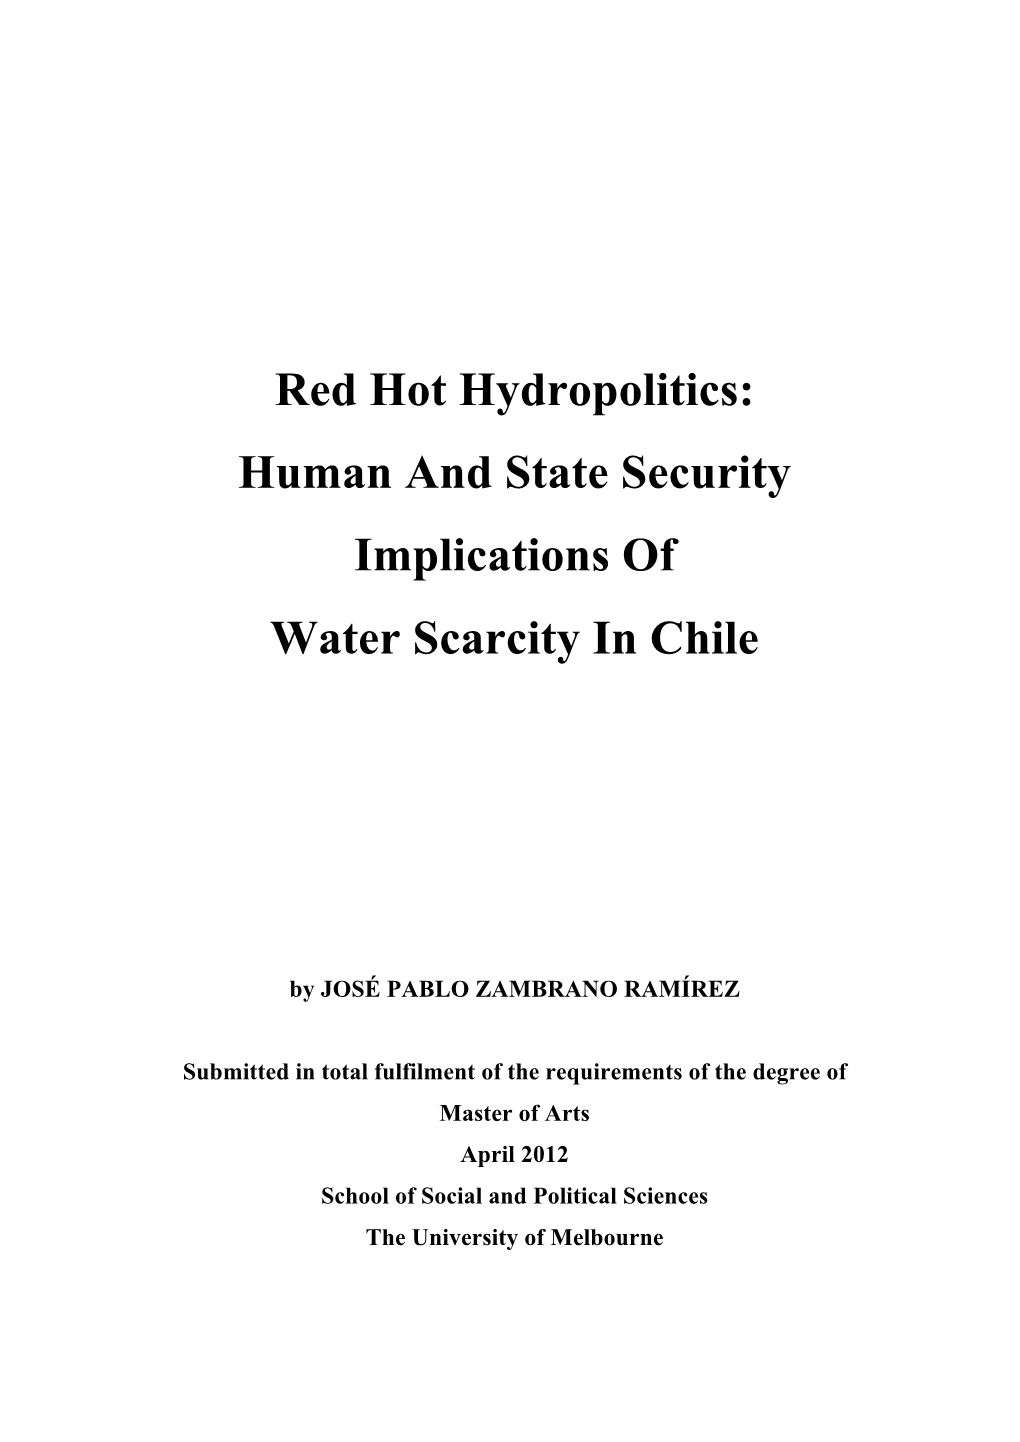 Human and State Security Implications of Water Scarcity in Chile